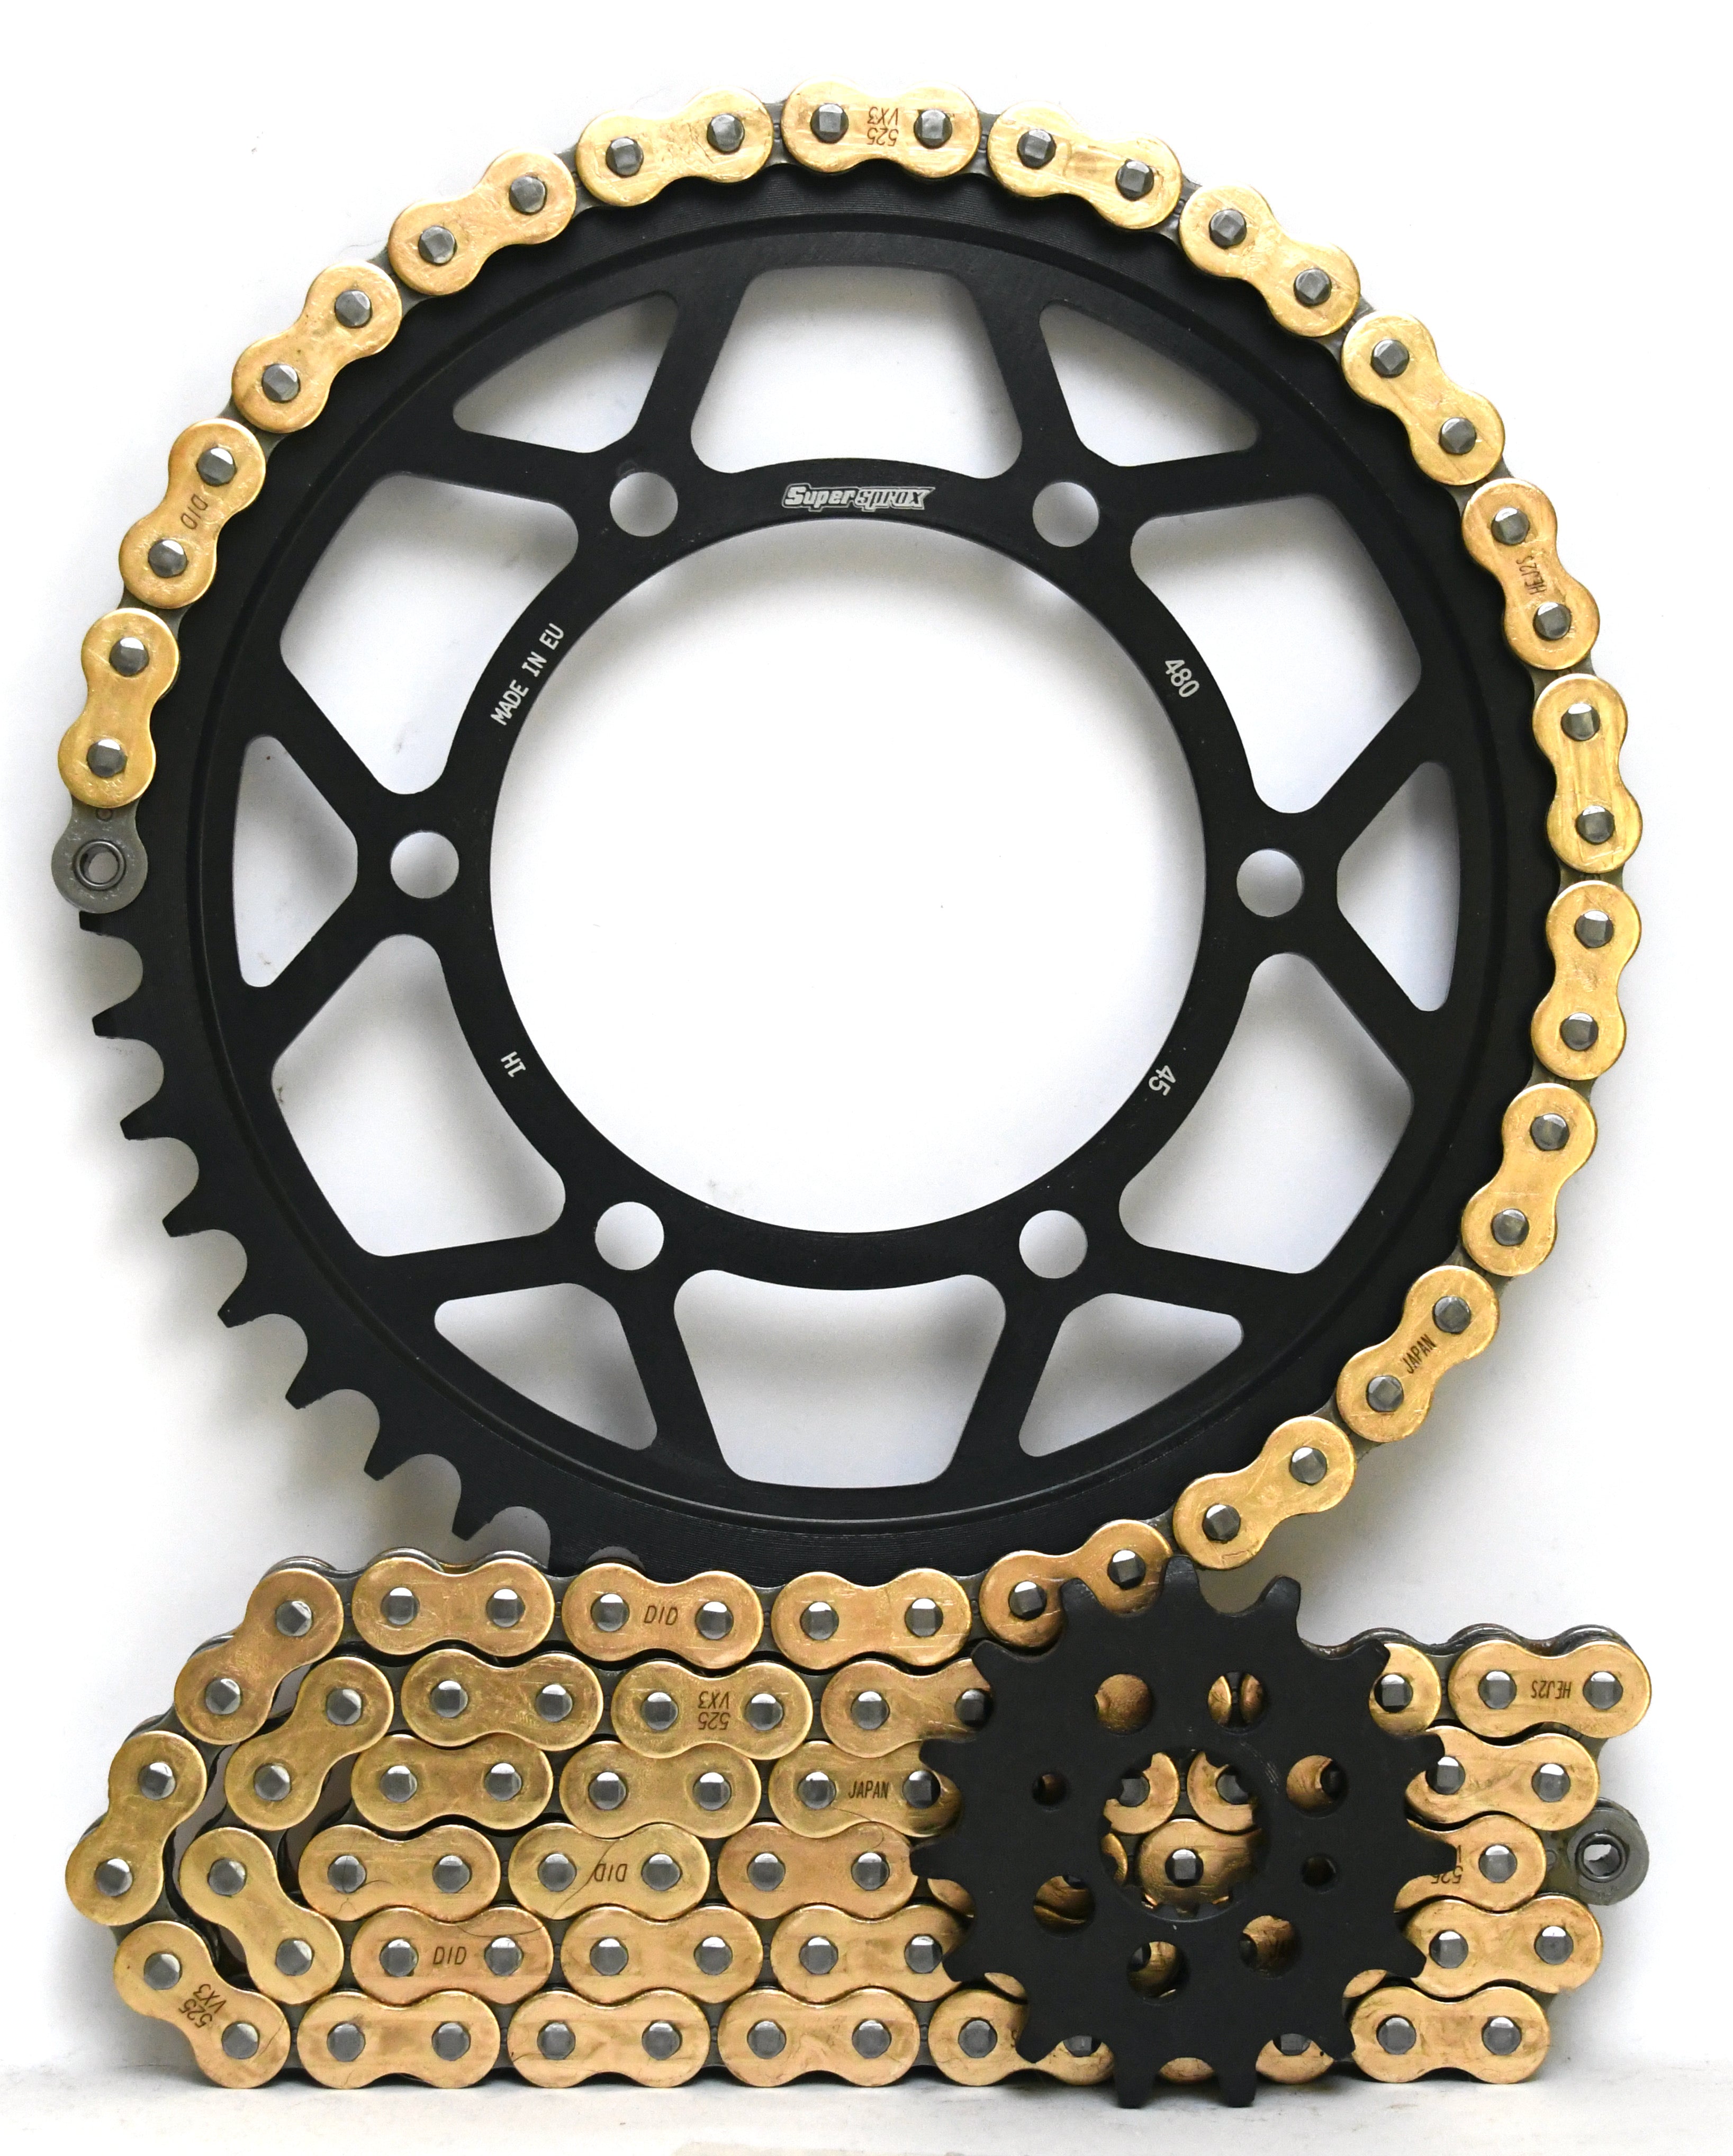 Supersprox and DID Chain & Steel Sprocket Kit for Yamaha MT-09 and XSR 900 - Standard Gearing